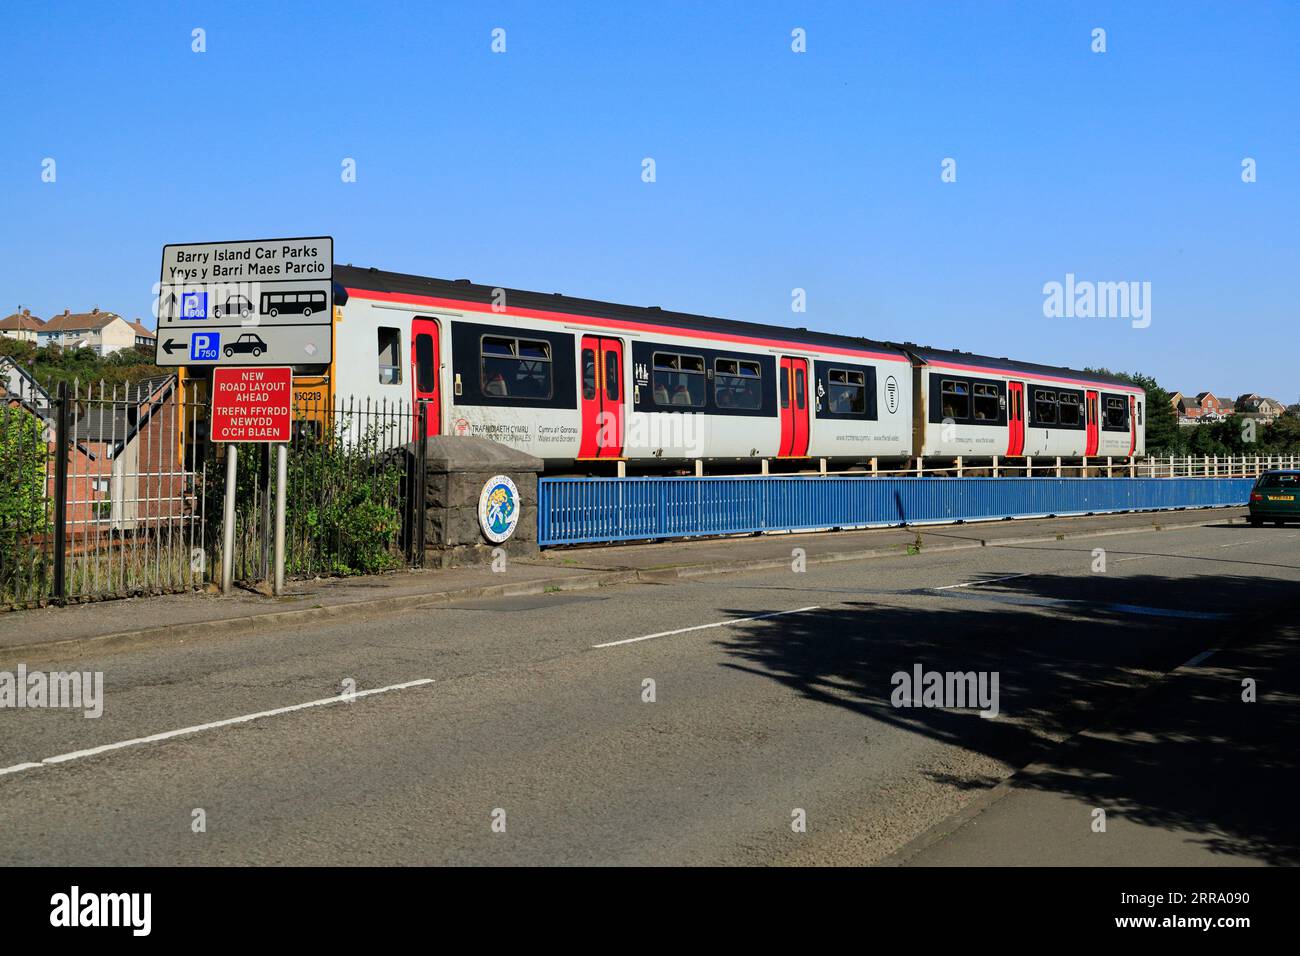 Transport for Wales Train, Barry Island, Vale of Glamorgan, South Wales, UK. Stockfoto